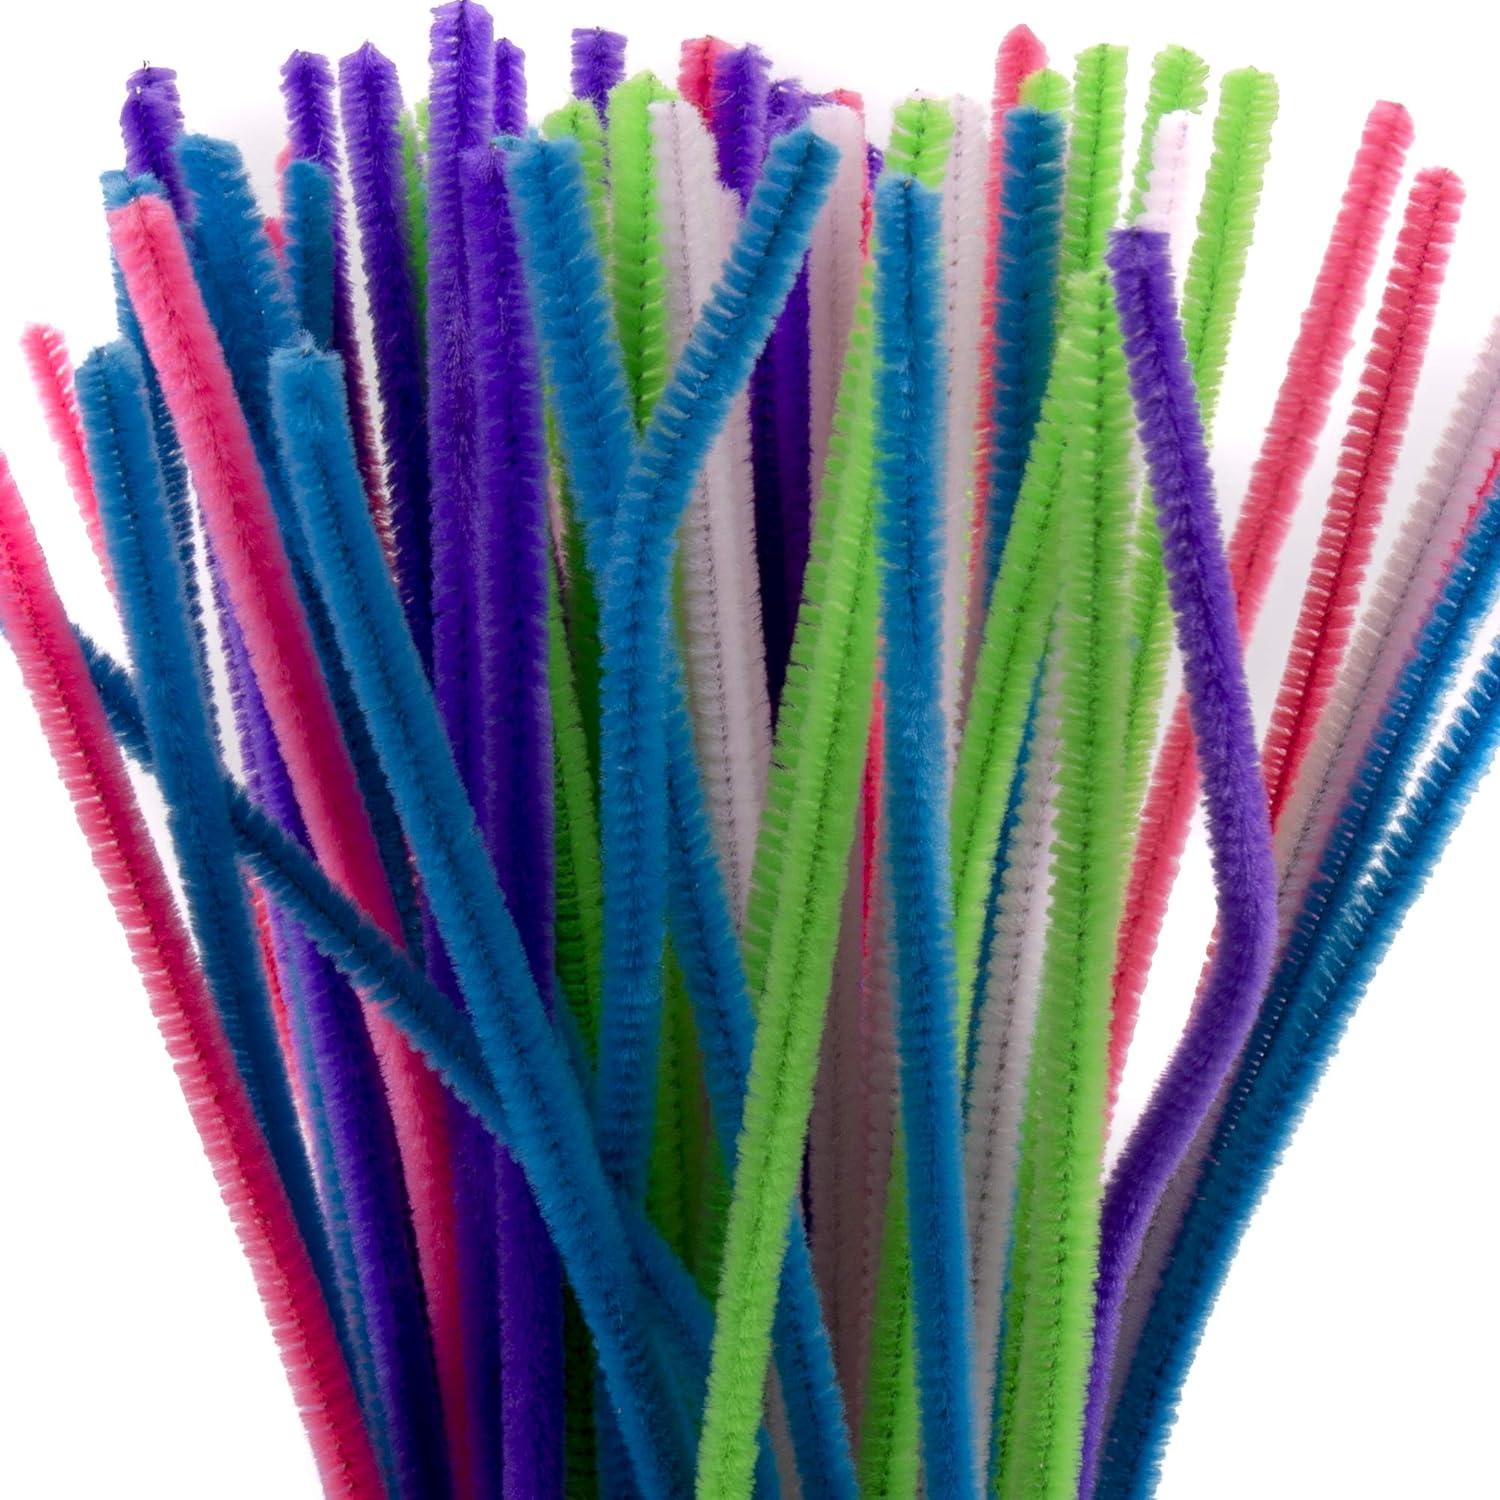 Horizon Group USA 200 Neon Fuzzy Sticks, Value Pack of Pipe Cleaners in 6  Colors, 12 Inches, Chenille Stems, Bendy Sticks, Great for DIY Arts &  Crafts Projects, Classrooms & Craft Rooms : Toys & Games 